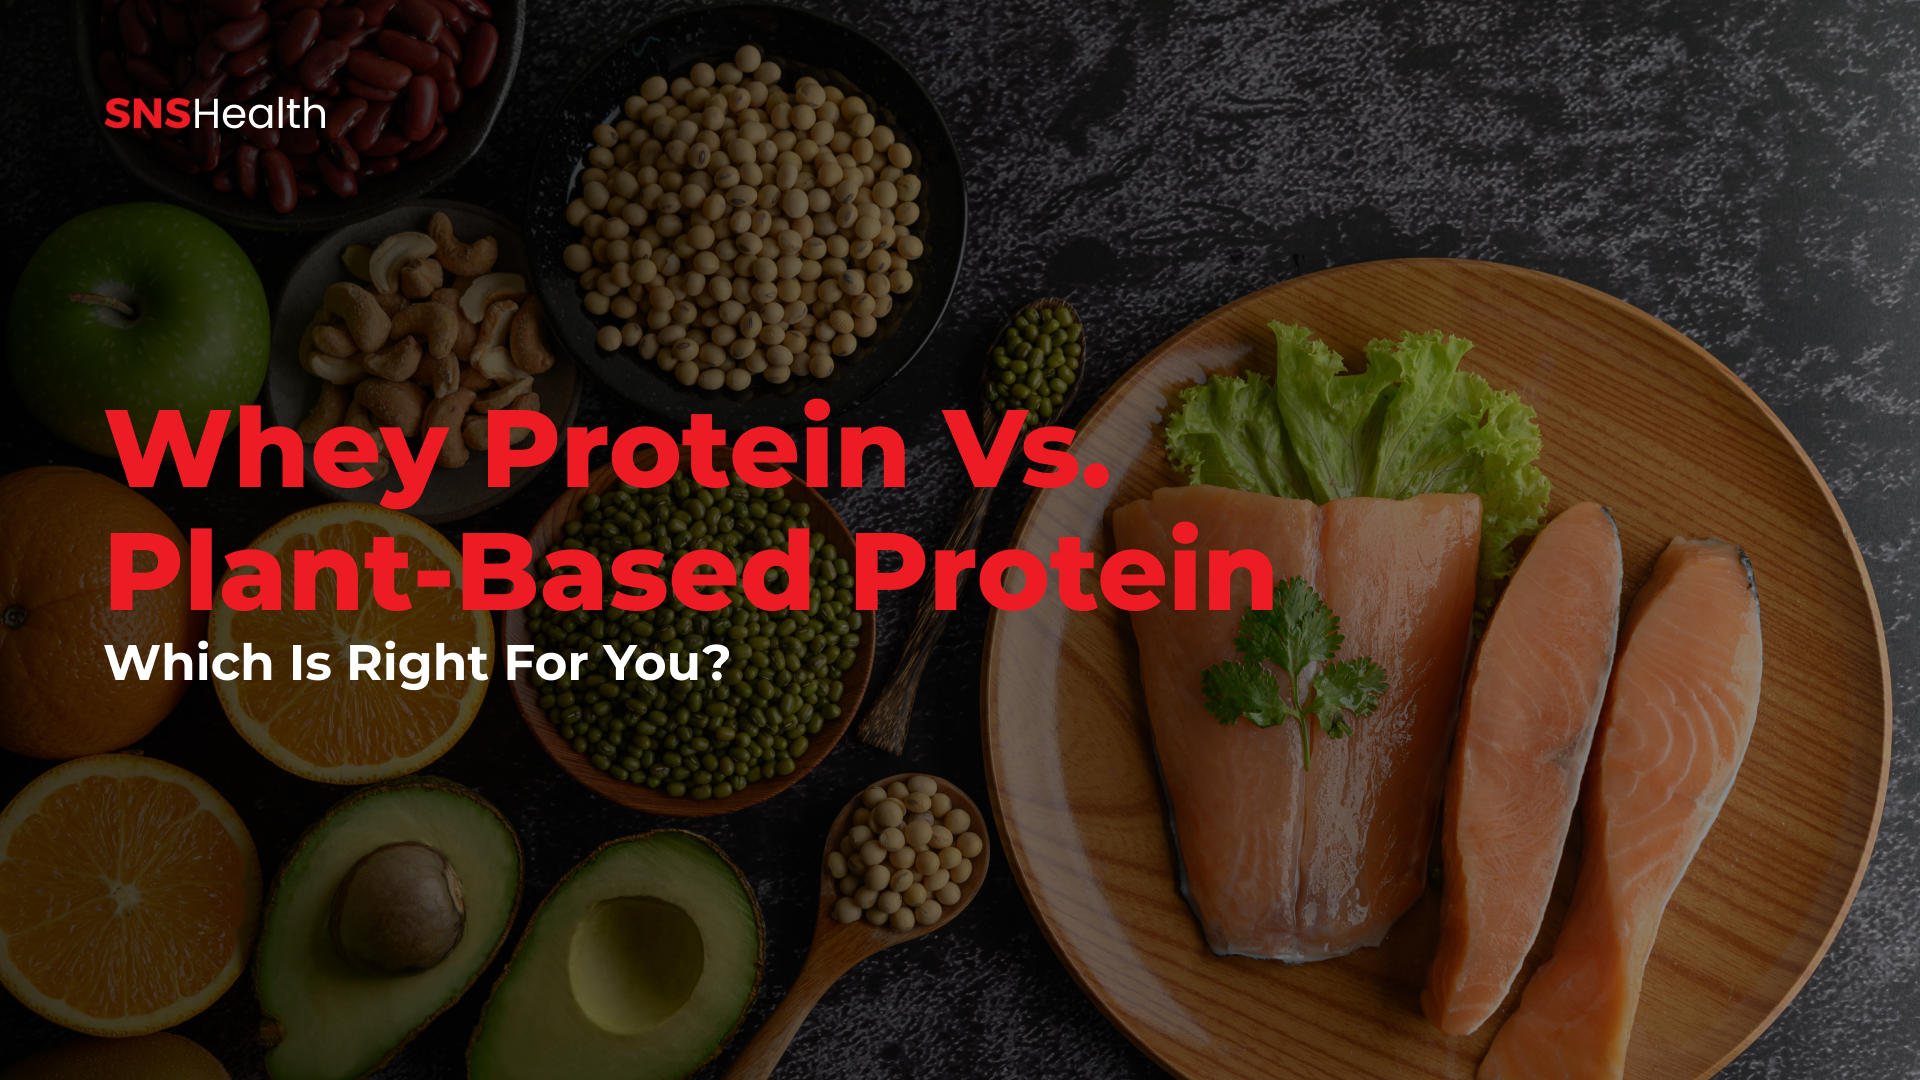 Whey Protein vs Plant-Based Protein - Which is Right for You